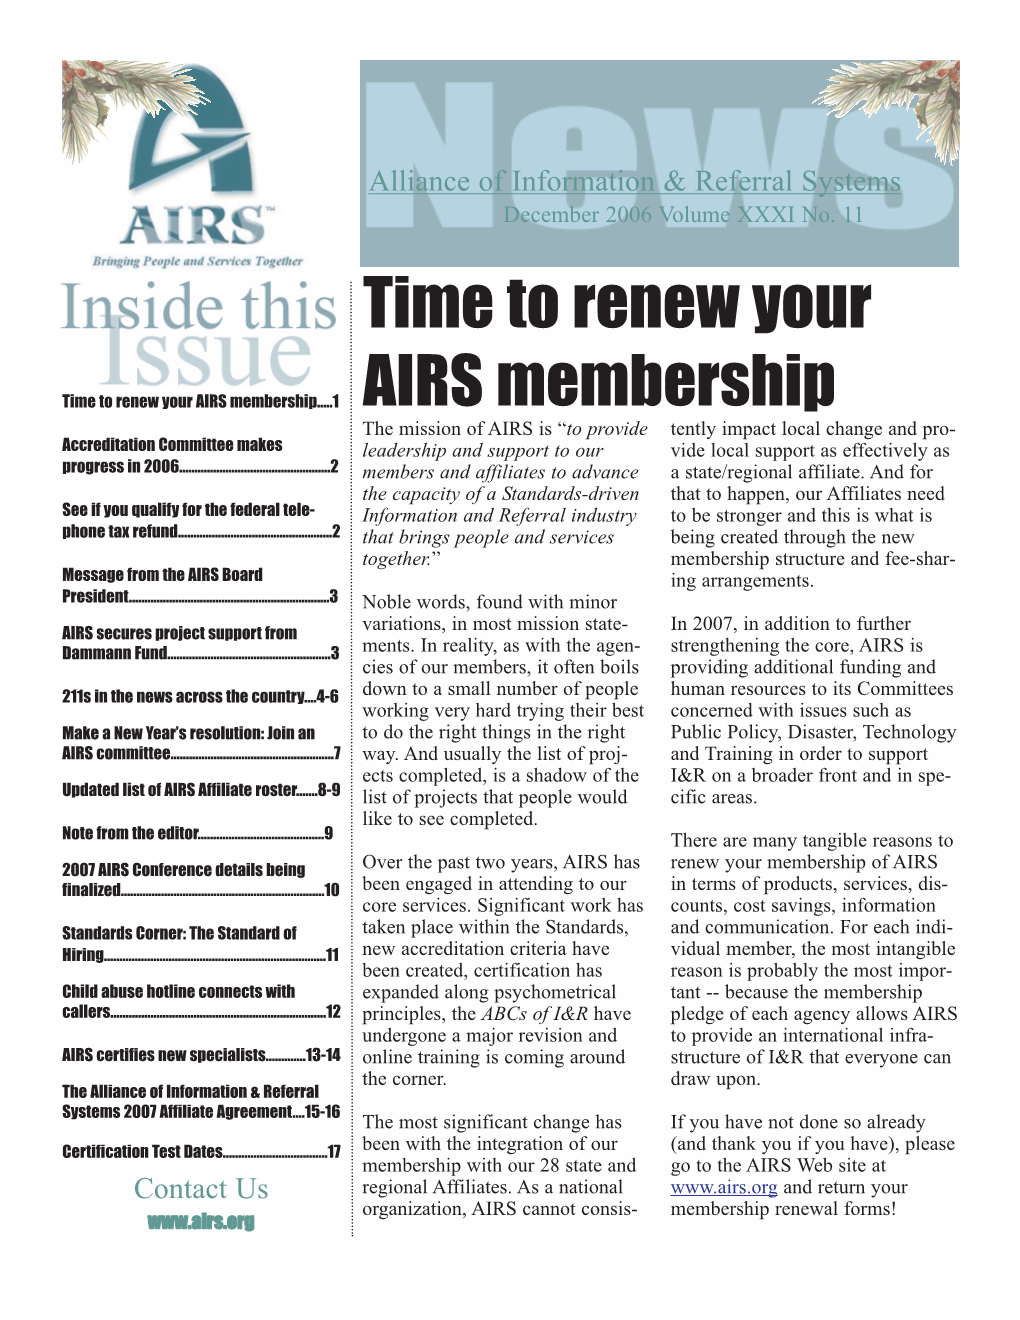 Time to Renew Your AIRS Membership